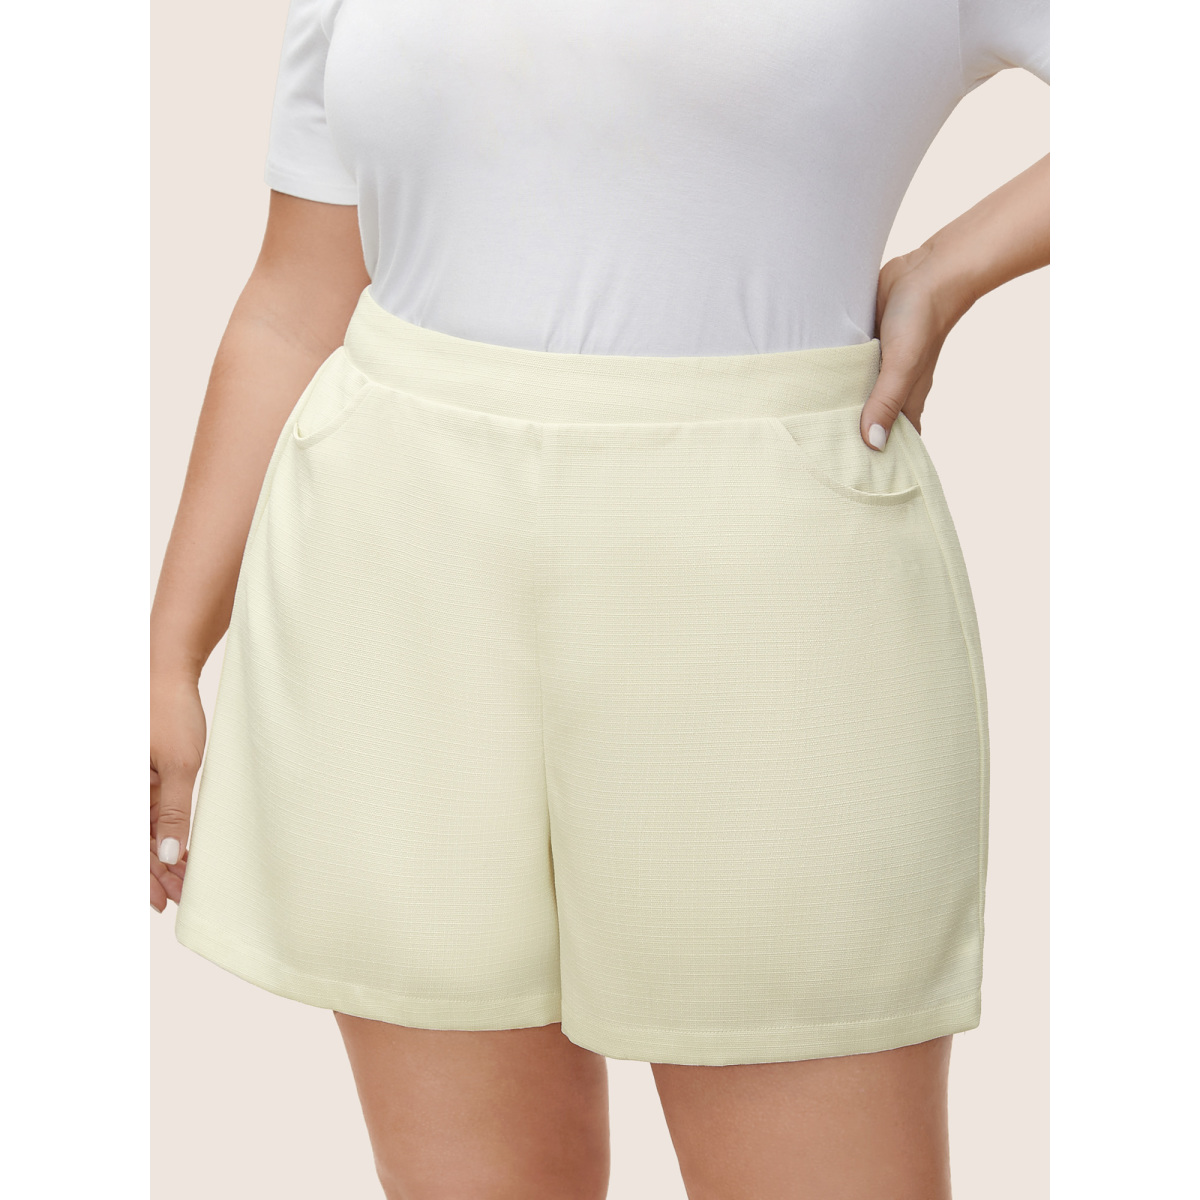 

Plus Size Plain Textured Elastic Waist High Rise Shorts Women Beige Casual Non Loose Everyday Shorts BloomChic